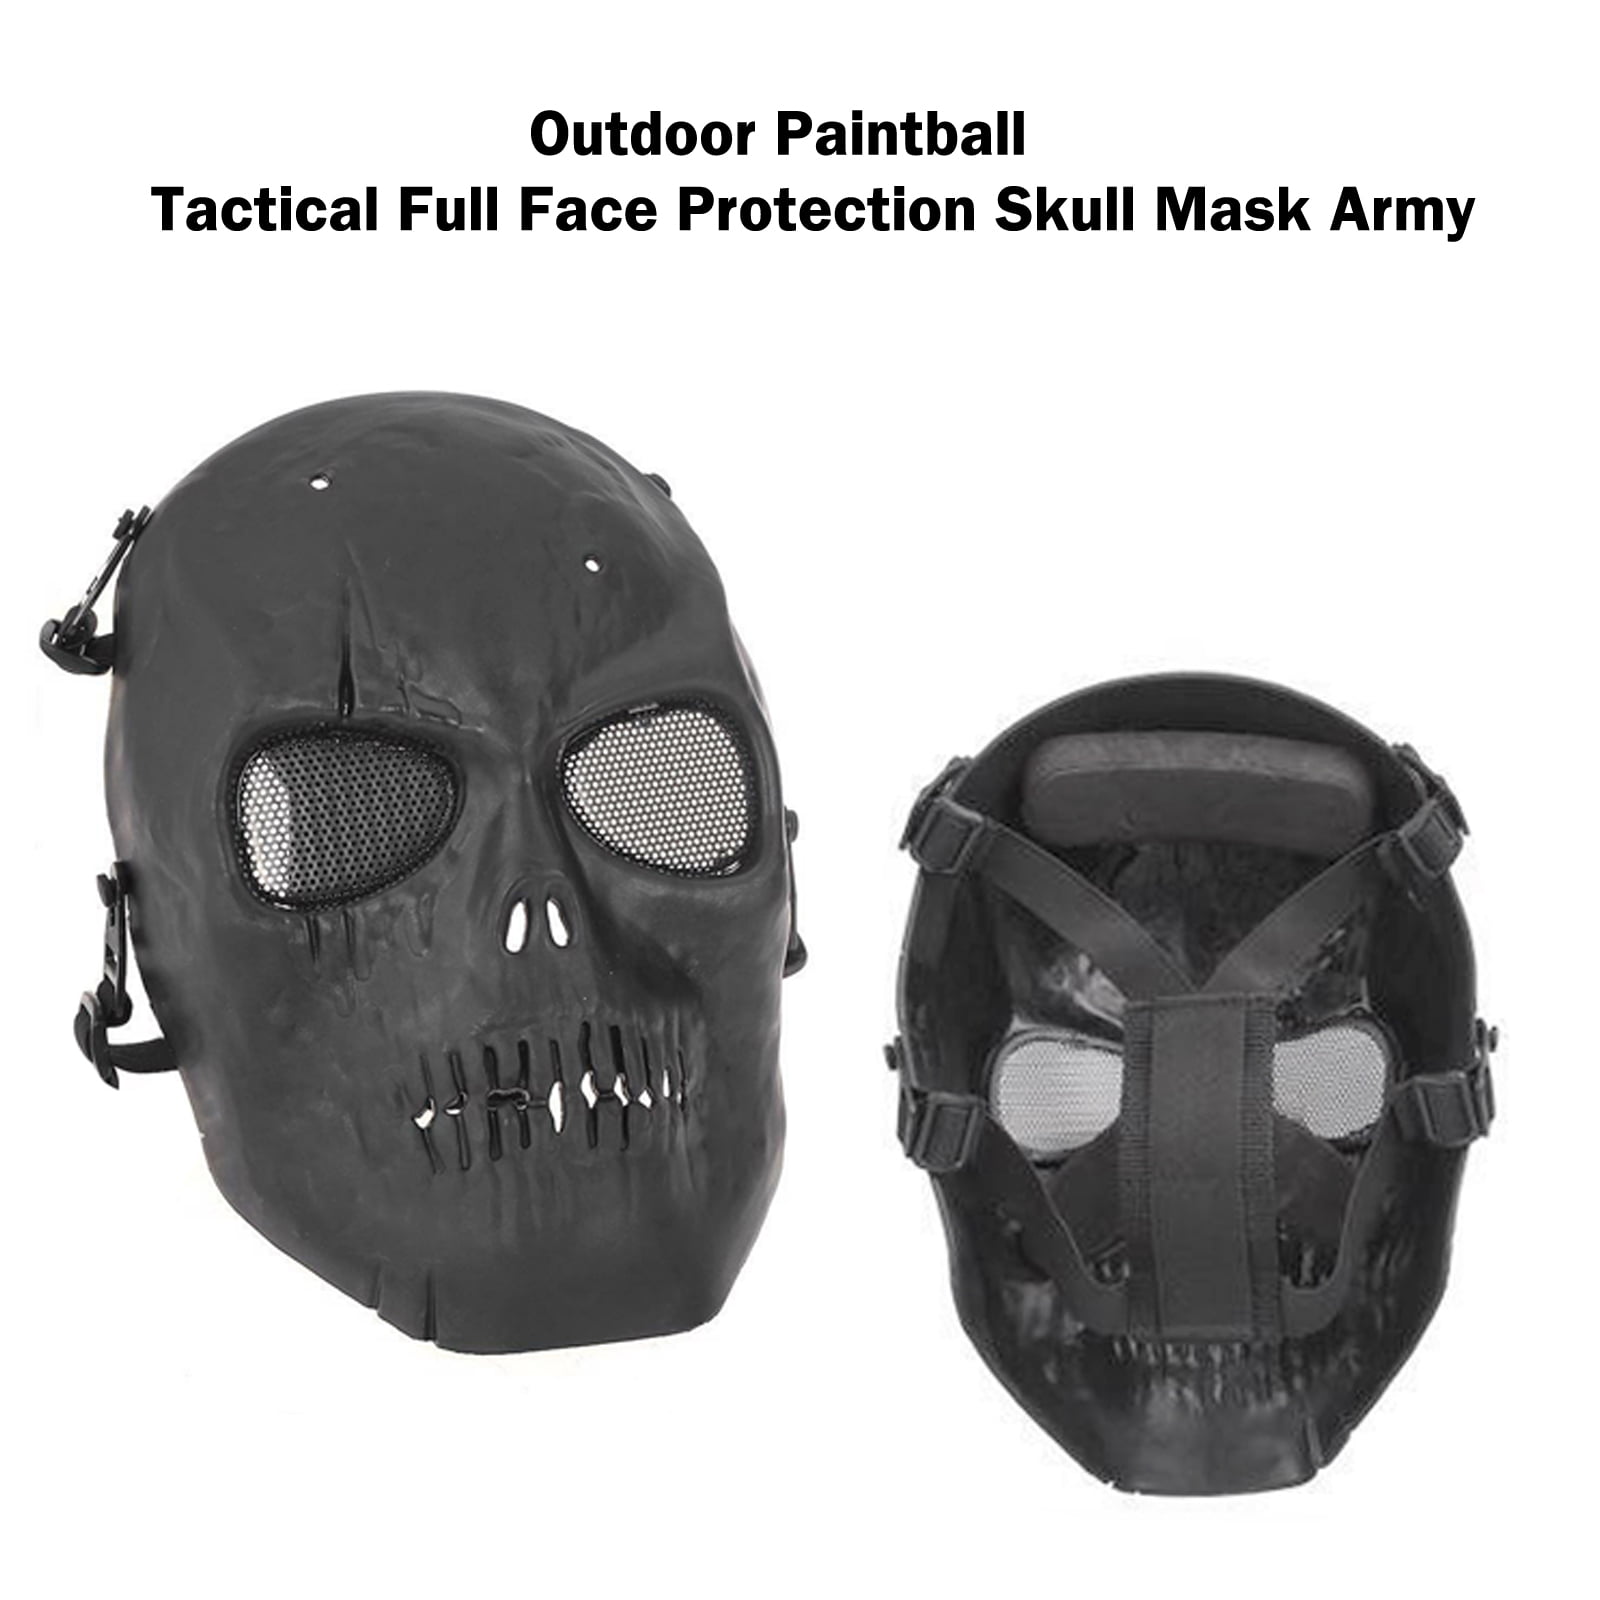 Outdoor Paintball Taktische Maske Full Face Protection Skull Army D1 